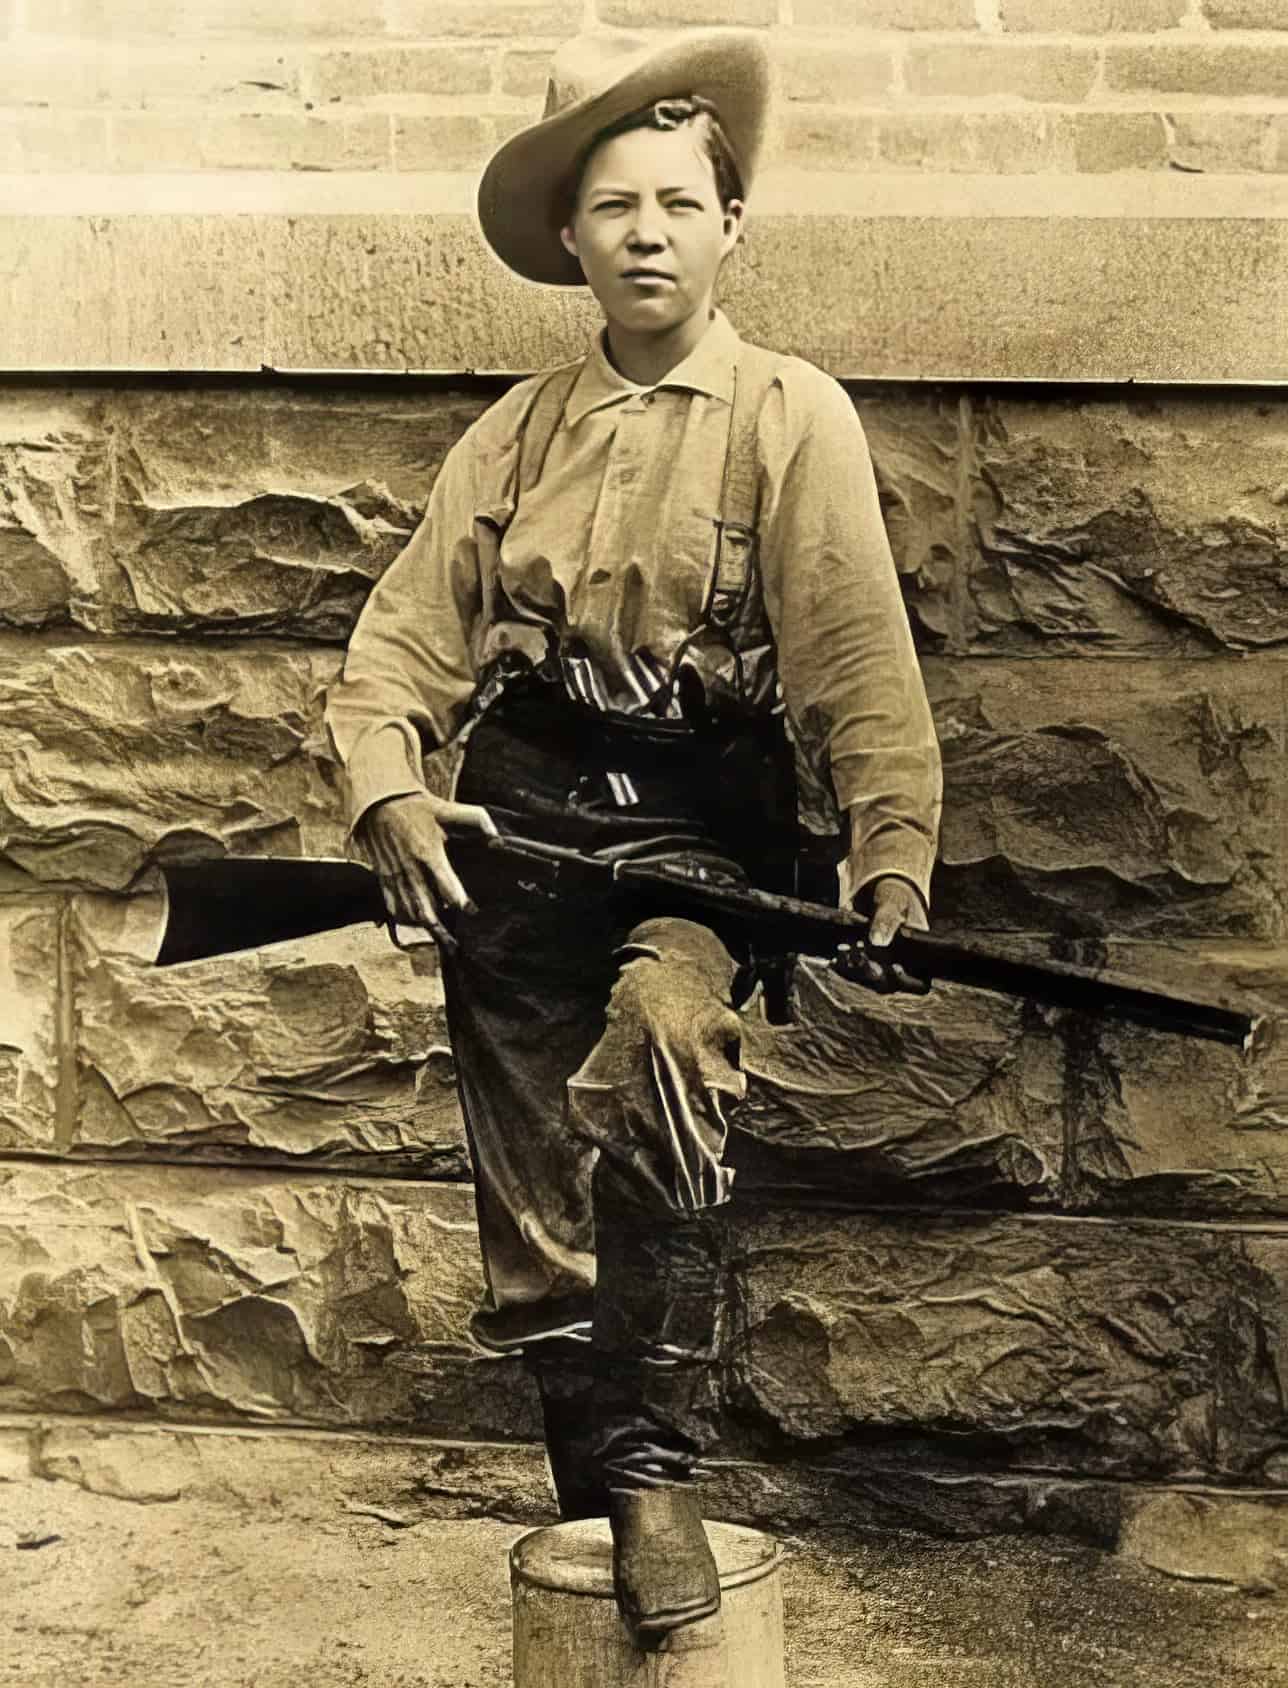 10 Famous Female Cowgirl Outlaws Who Ruled The Wild West